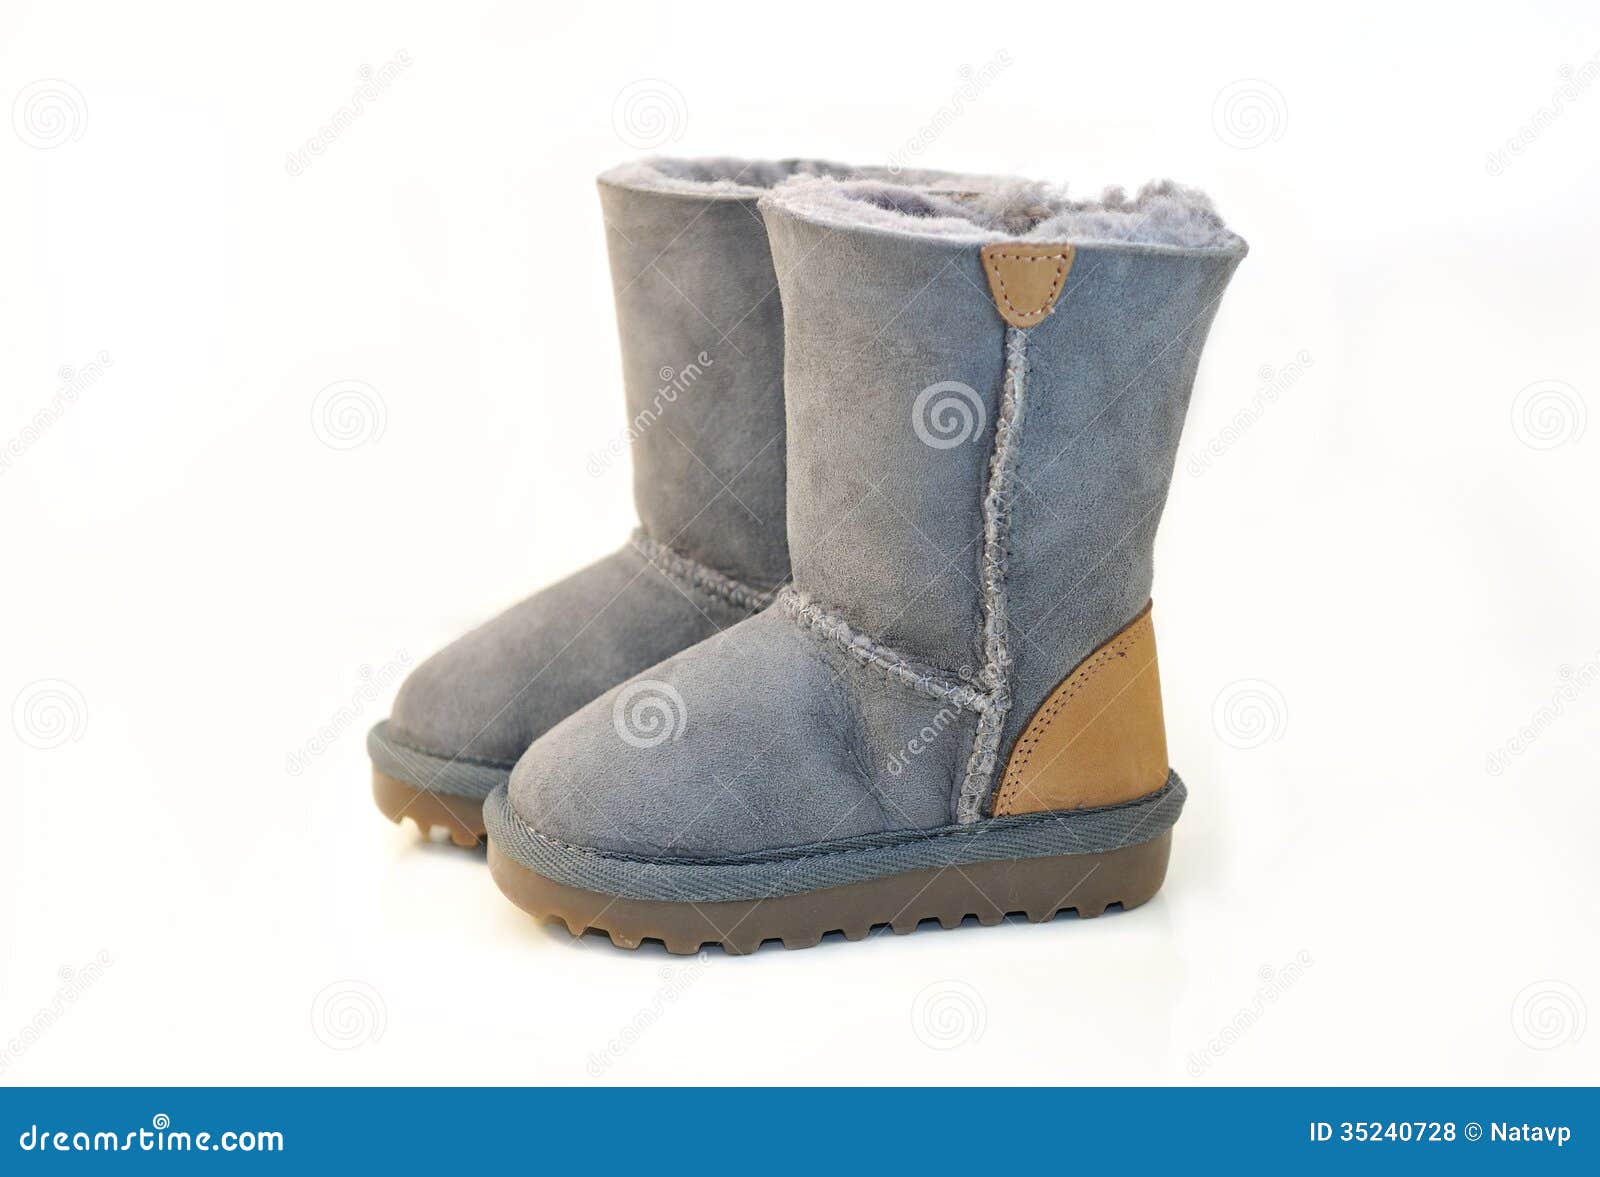 clipart of winter boots - photo #13